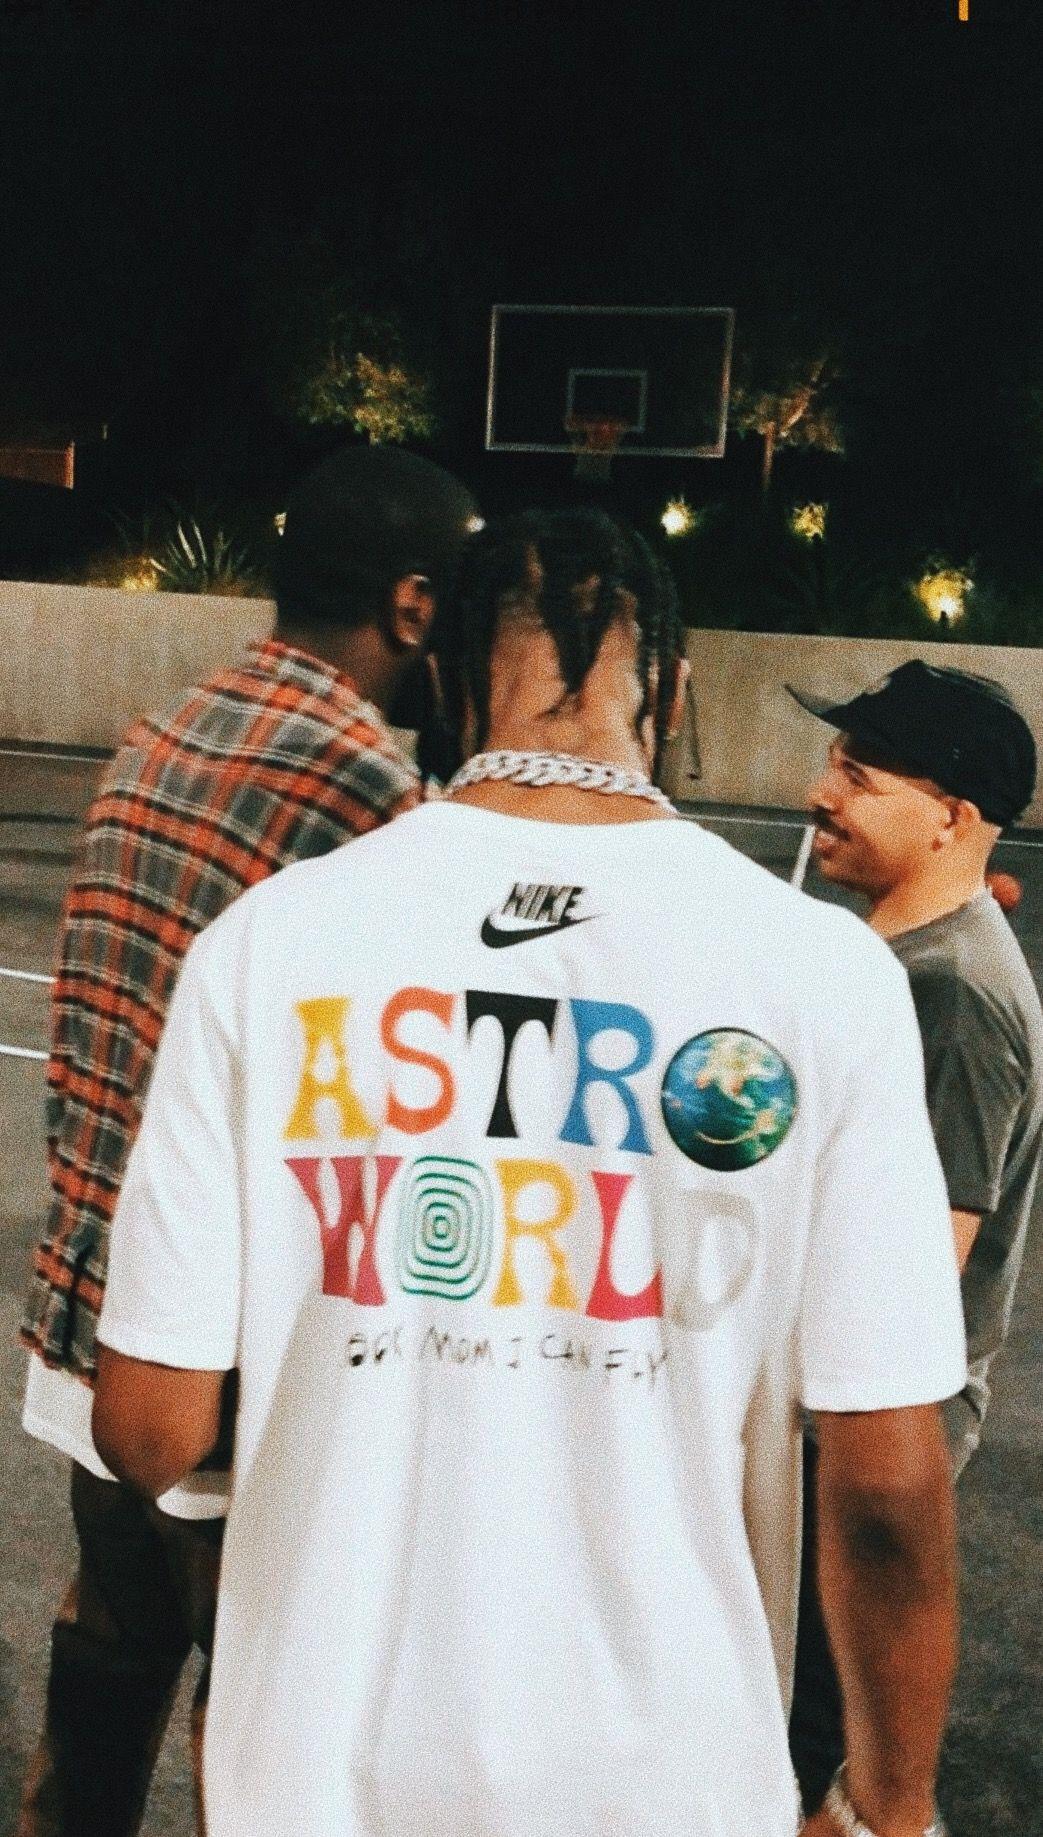 I Love Travis And The Whole Astroworld Aesthetic Sm